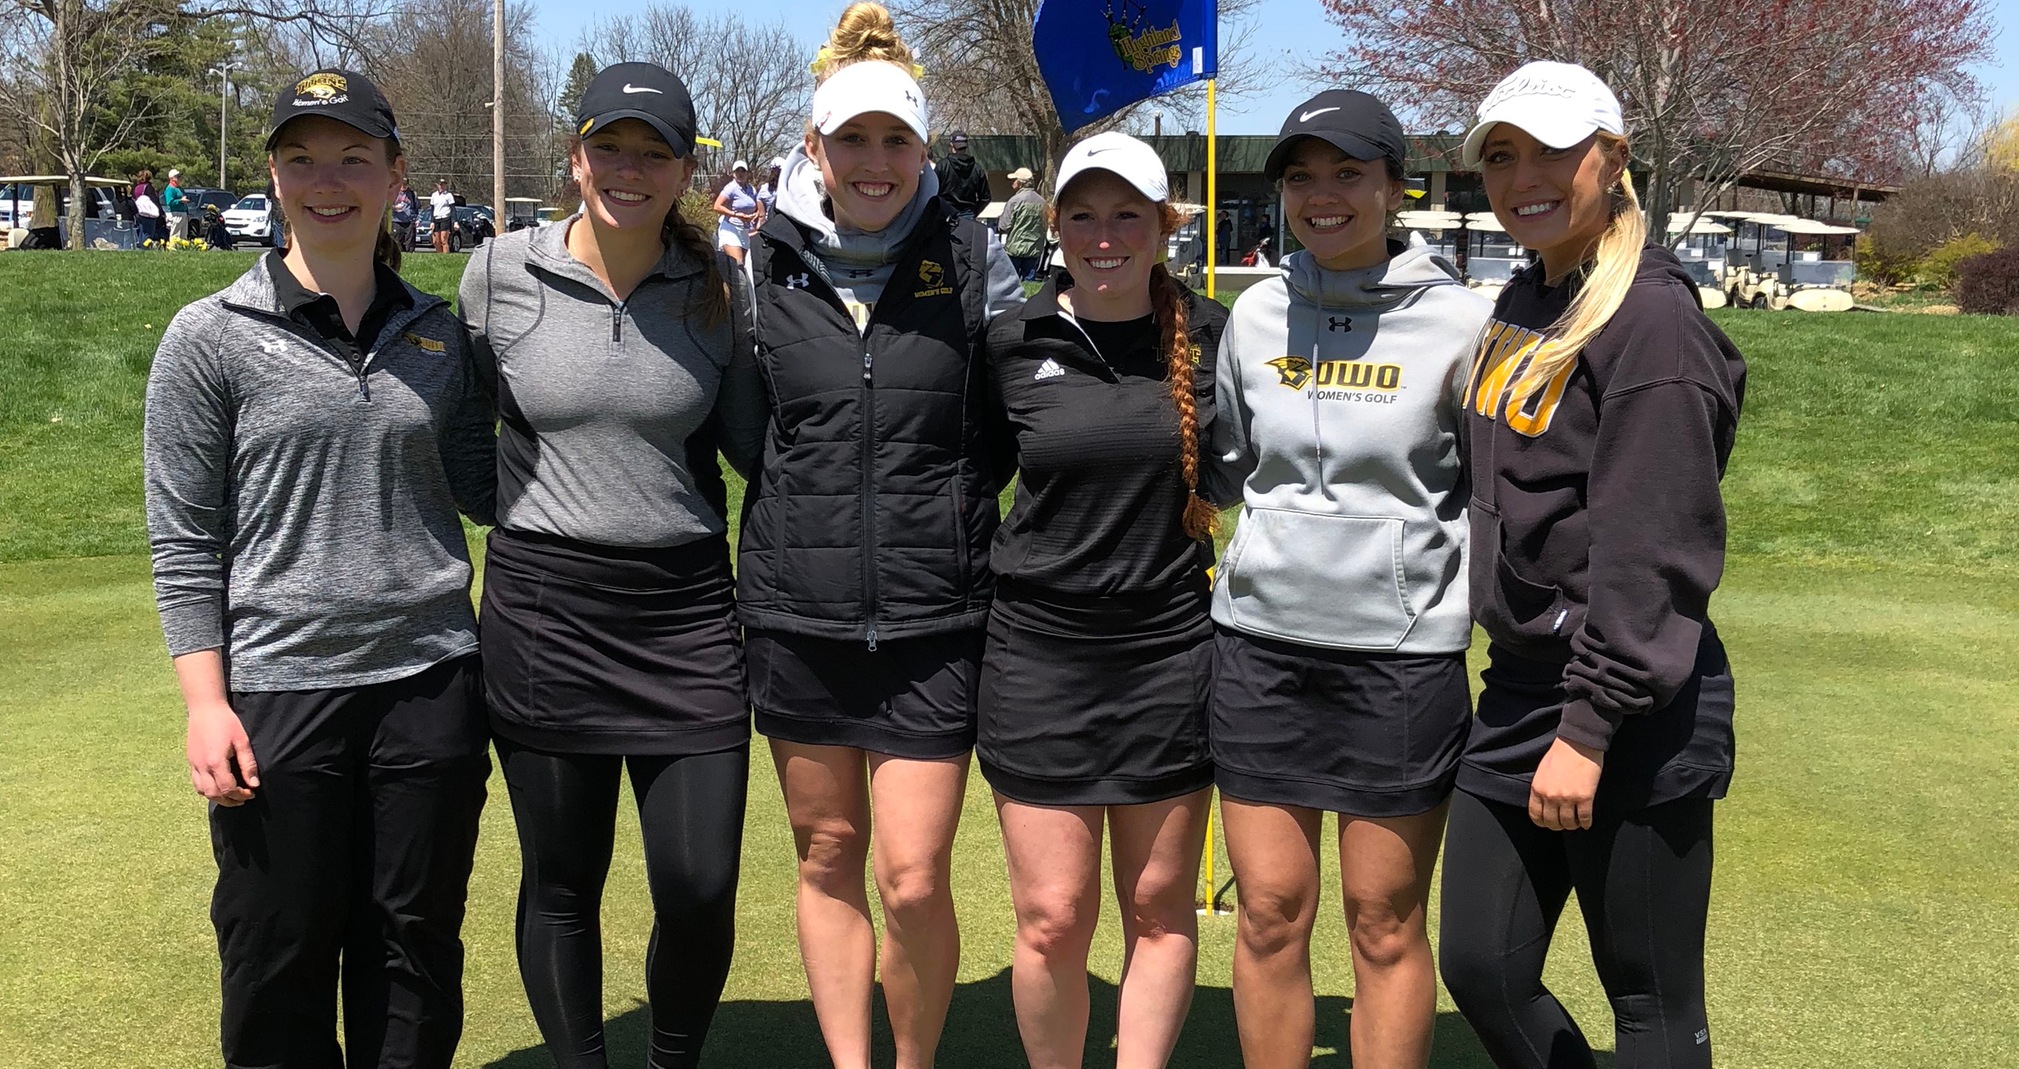 The Titans finished fourth among 14 teams at the Viking Invitational.